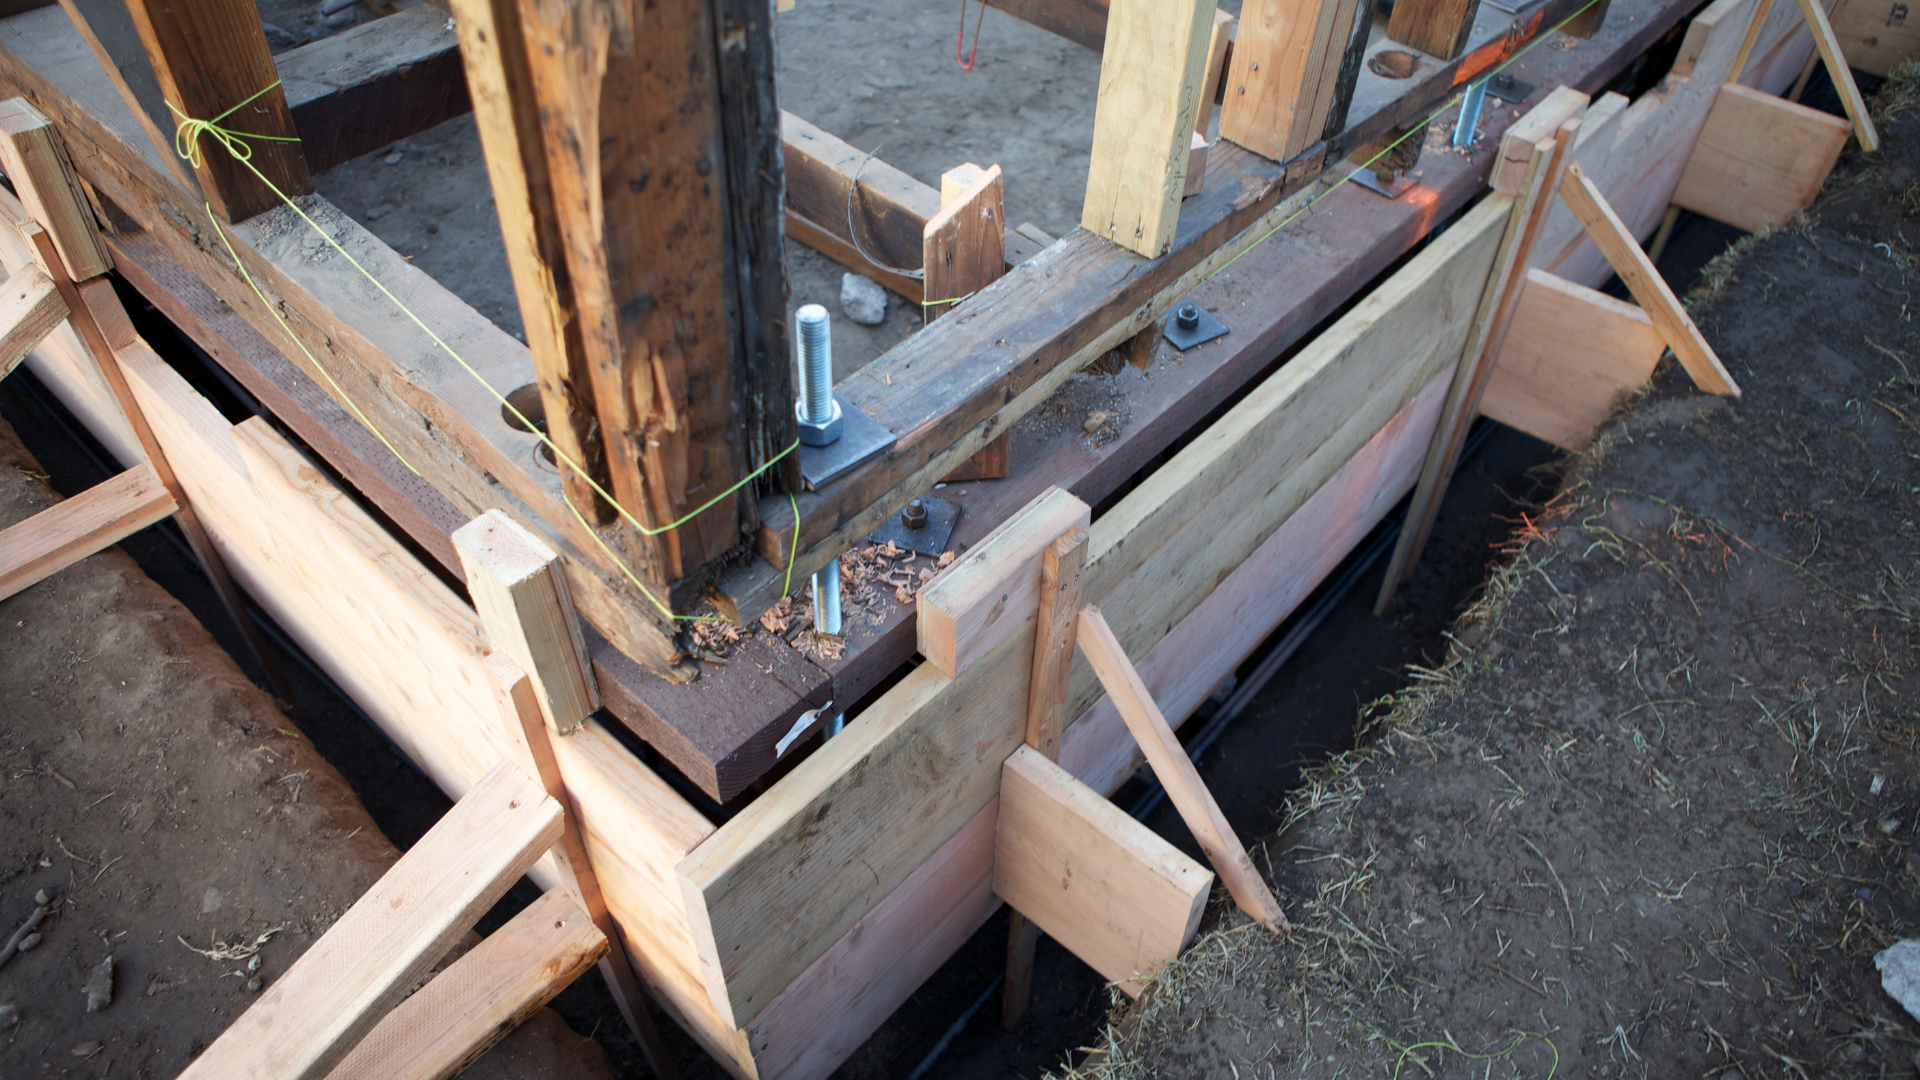 Bracing Foundation With Steel and Wood